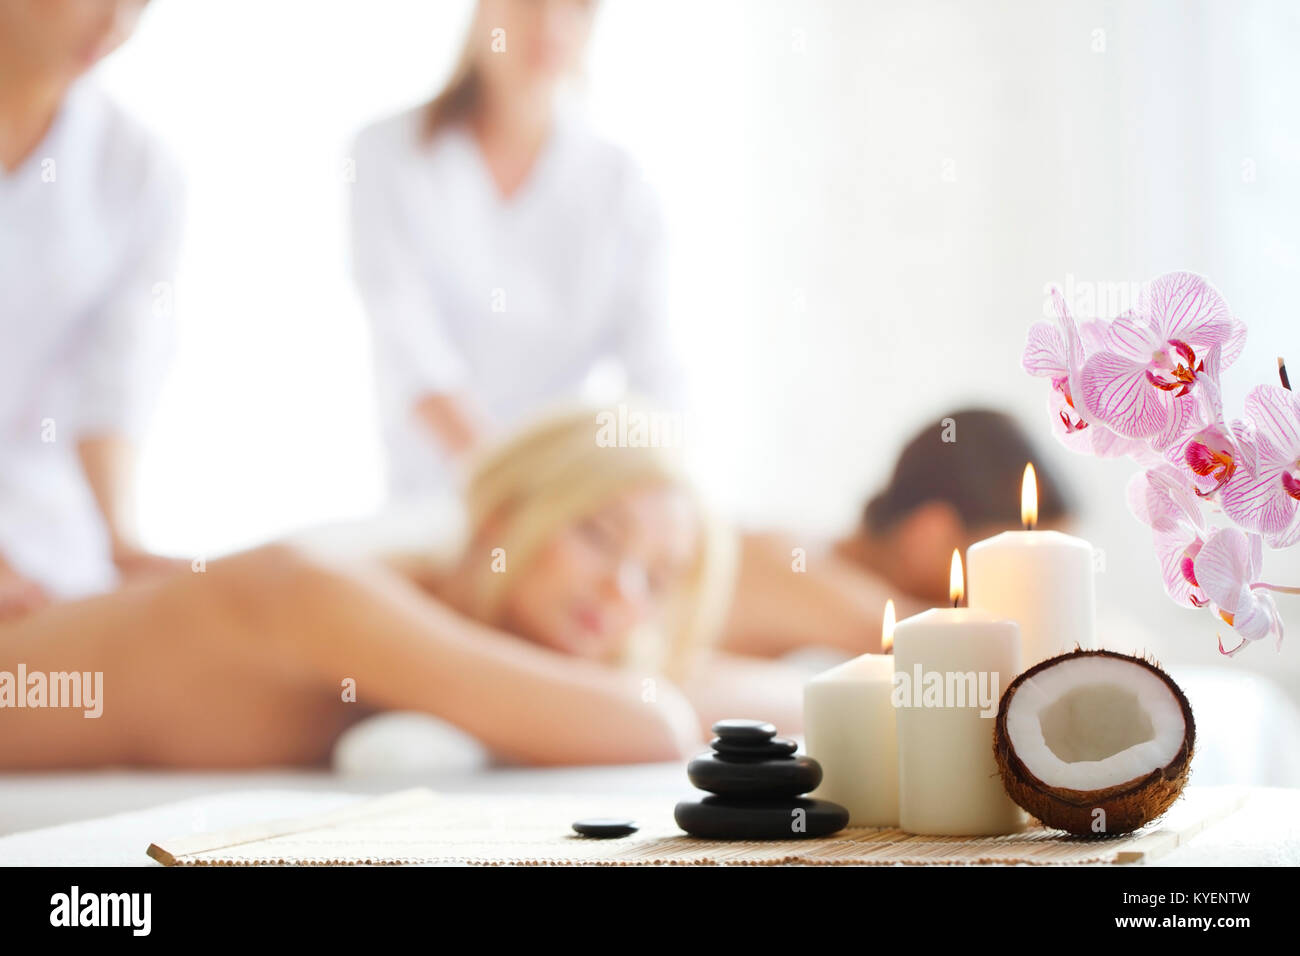 Spa massage tools and women getting massage on background Stock Photo